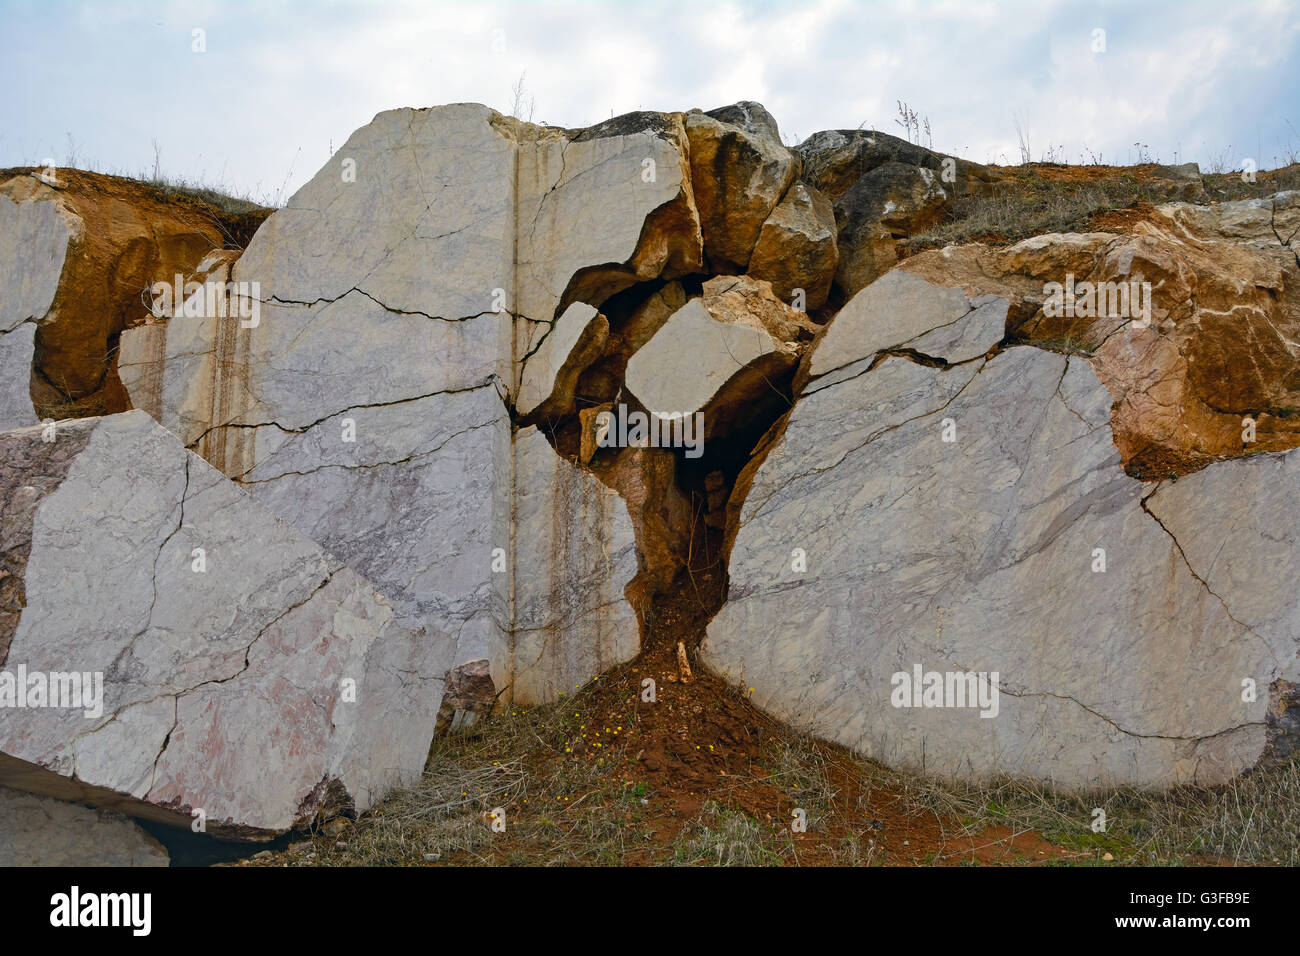 marble; career; limestone; quarry; outdoor; development; mining; rock; wall; rock; decorative; section; natural; lump; plate; We Stock Photo